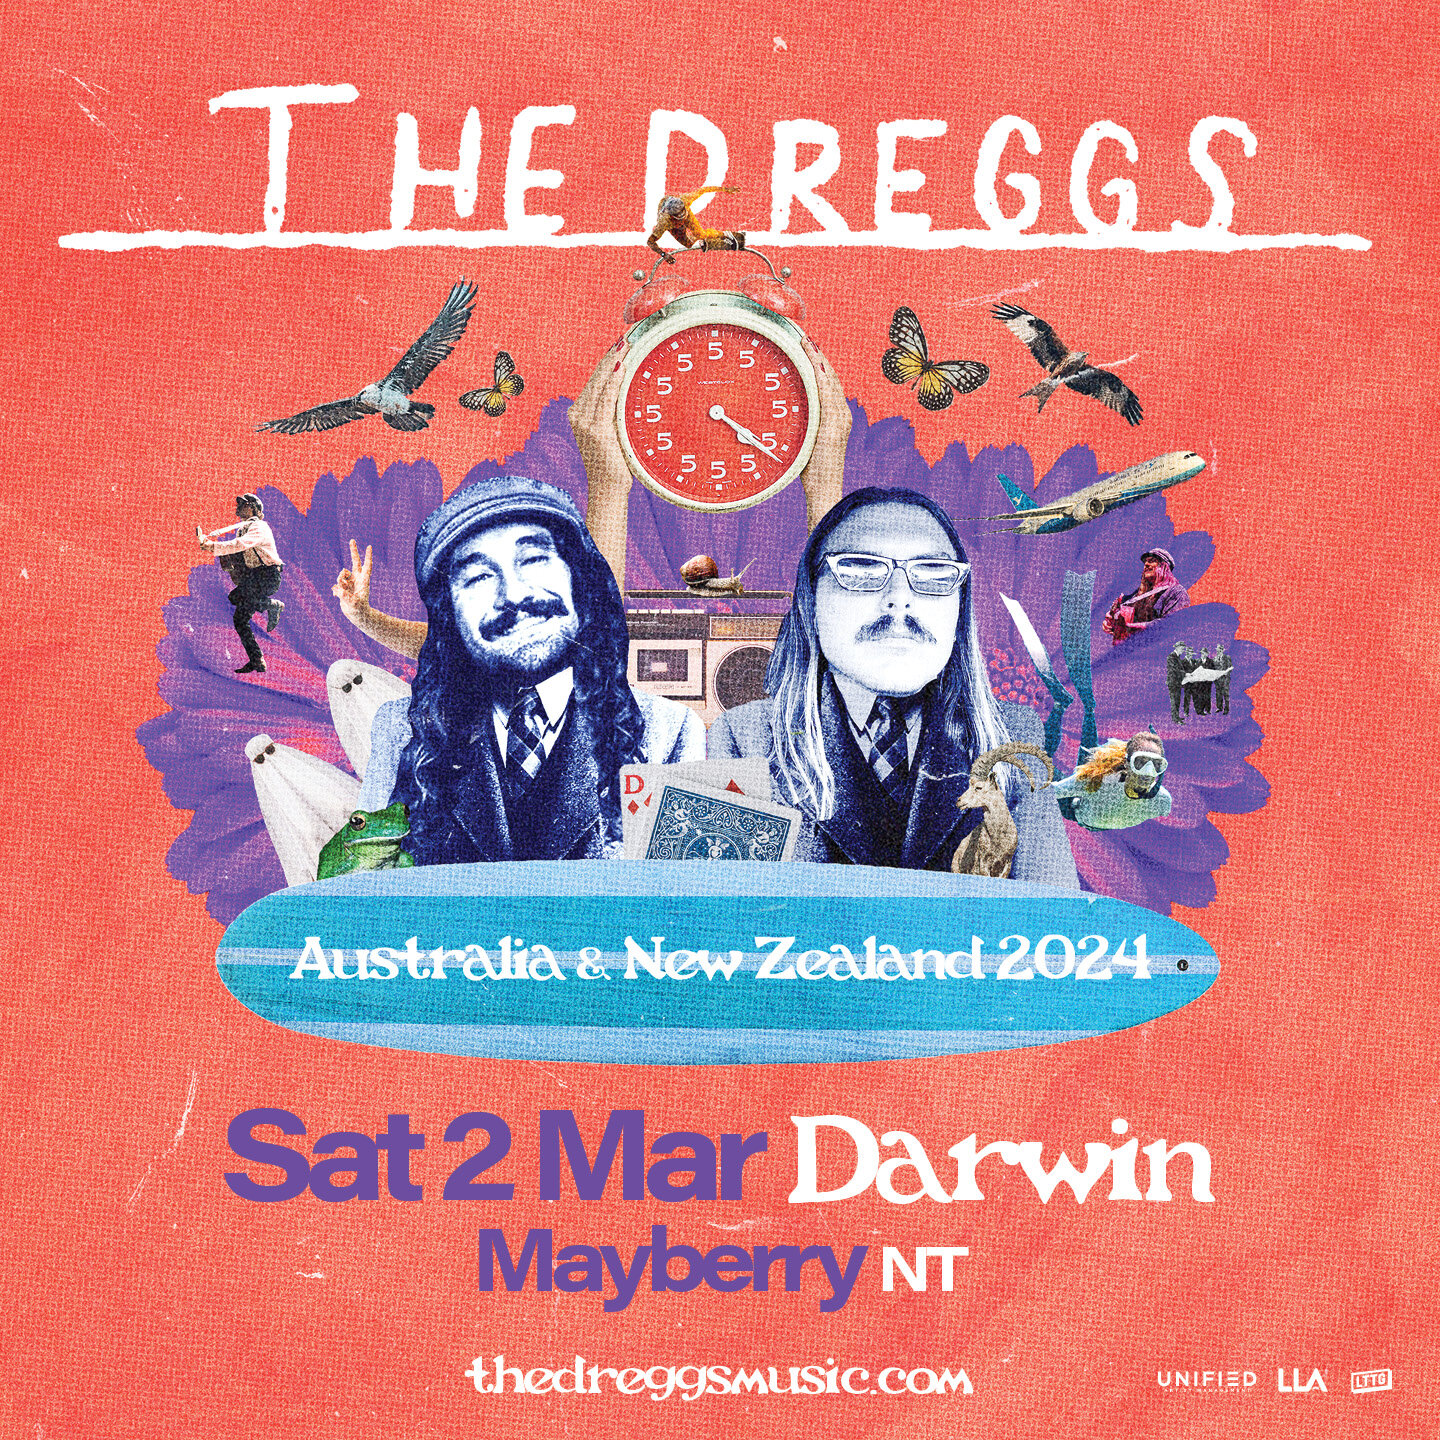 Tickets now ON SALE ☀️ 

Catch The Dreggs live at Mayberry on Saturday 2nd March 2024 🌊 

What a way to kick off 2024, with the Dreggs bringing their good vibes and tunes to Darwin! They&rsquo;ll be playing bangers from their new record and bangers 